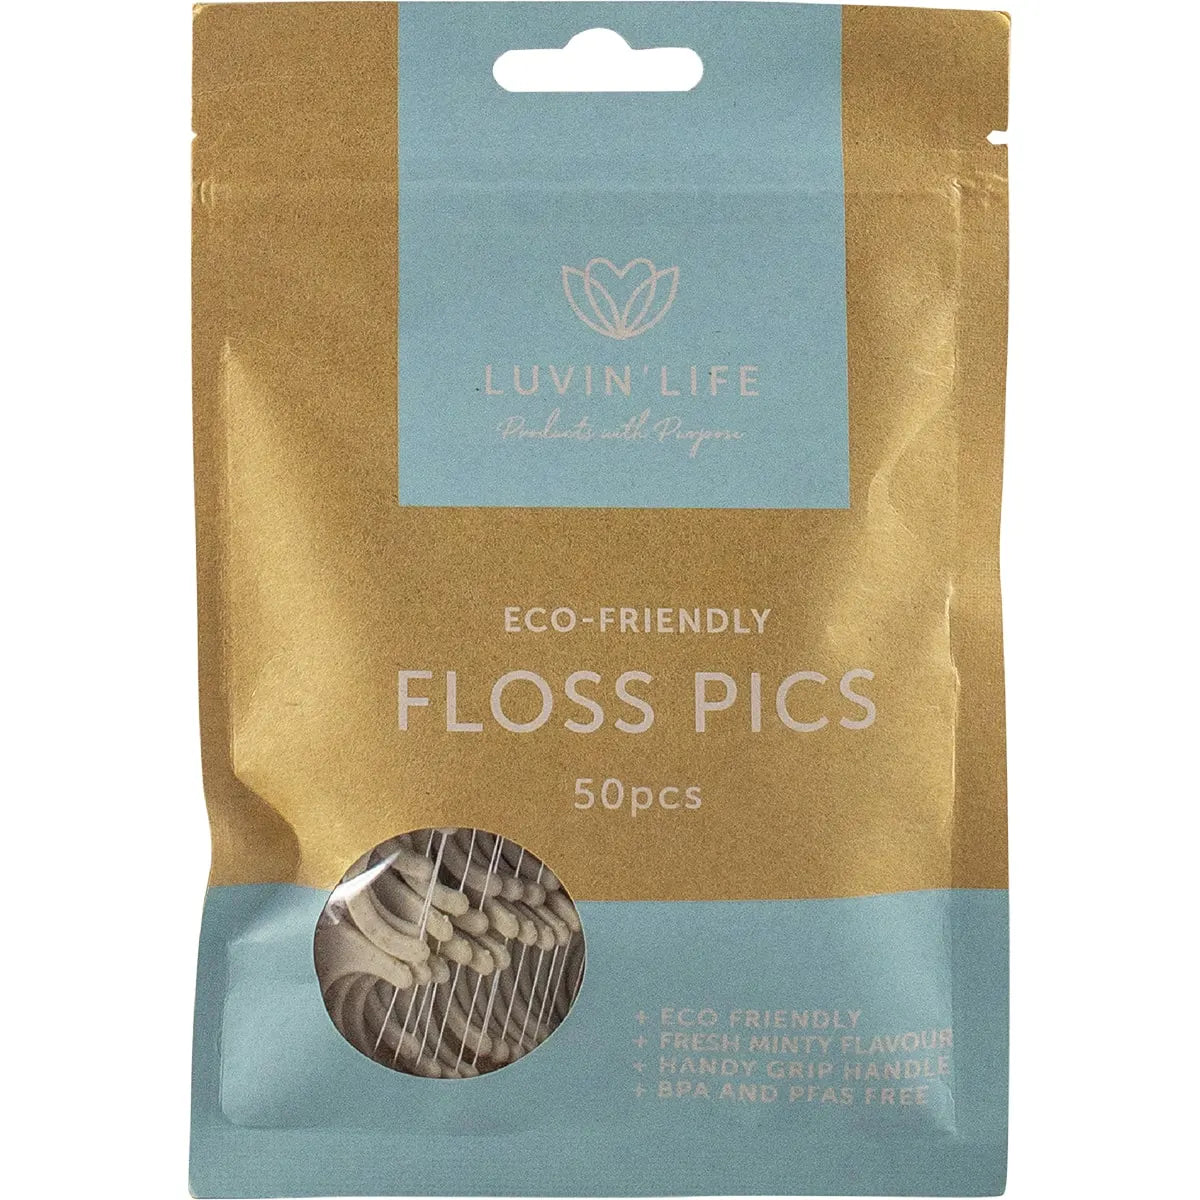 Luvin Life Floss Pics 50pcs, Eco-Friendly With A Fresh Minty Flavour